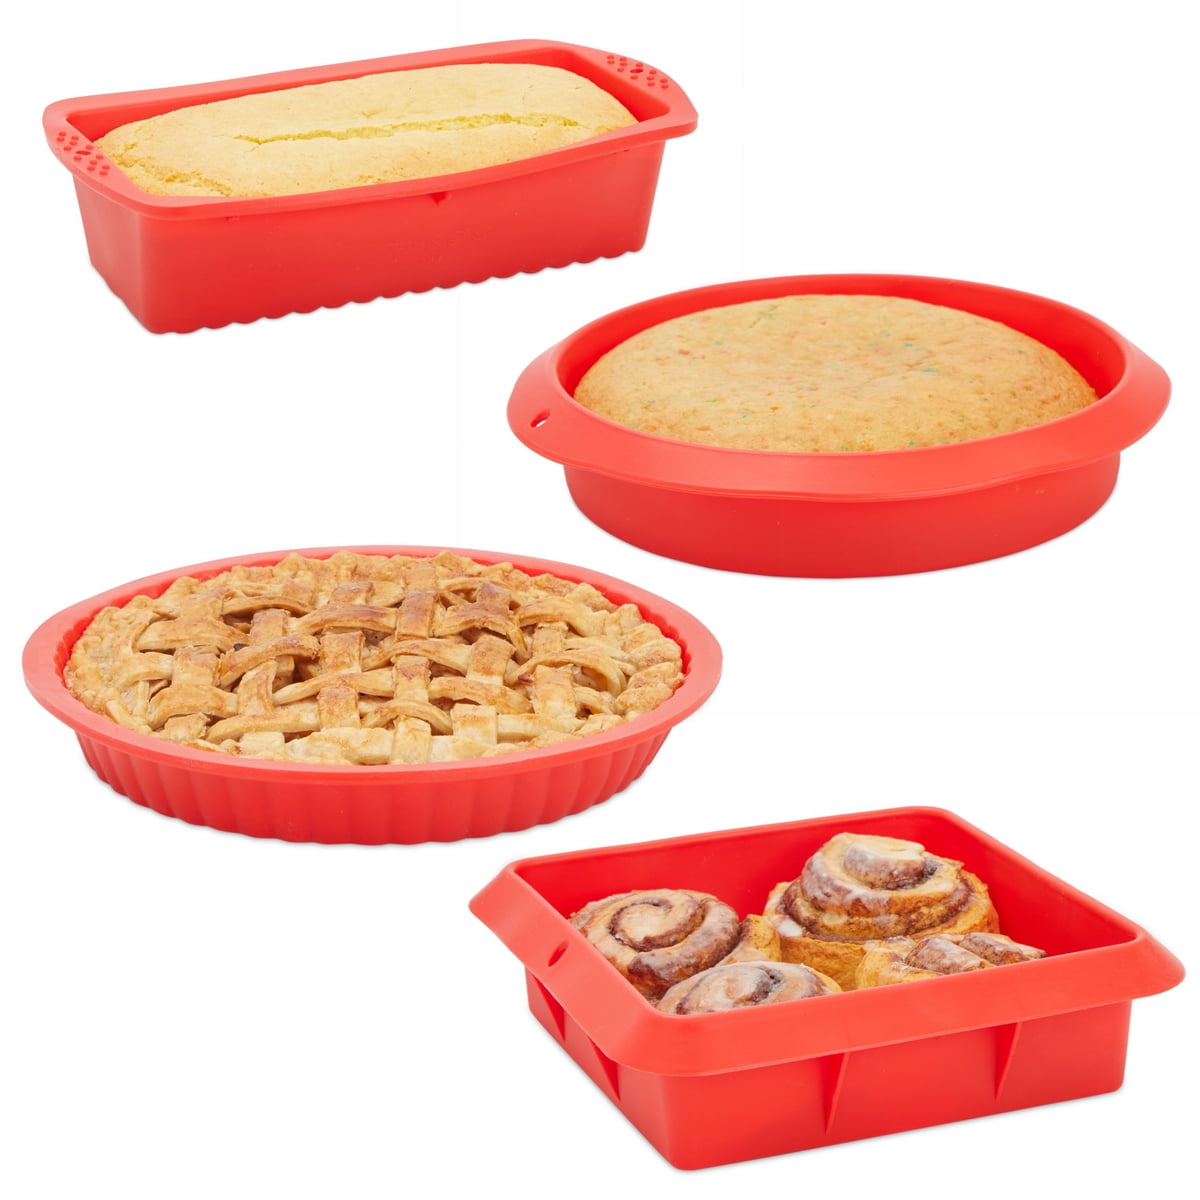 4/6/8/9" Silicone Round Bread Mold Cake Pan Muffin Bakeware Baking Mould Tool 